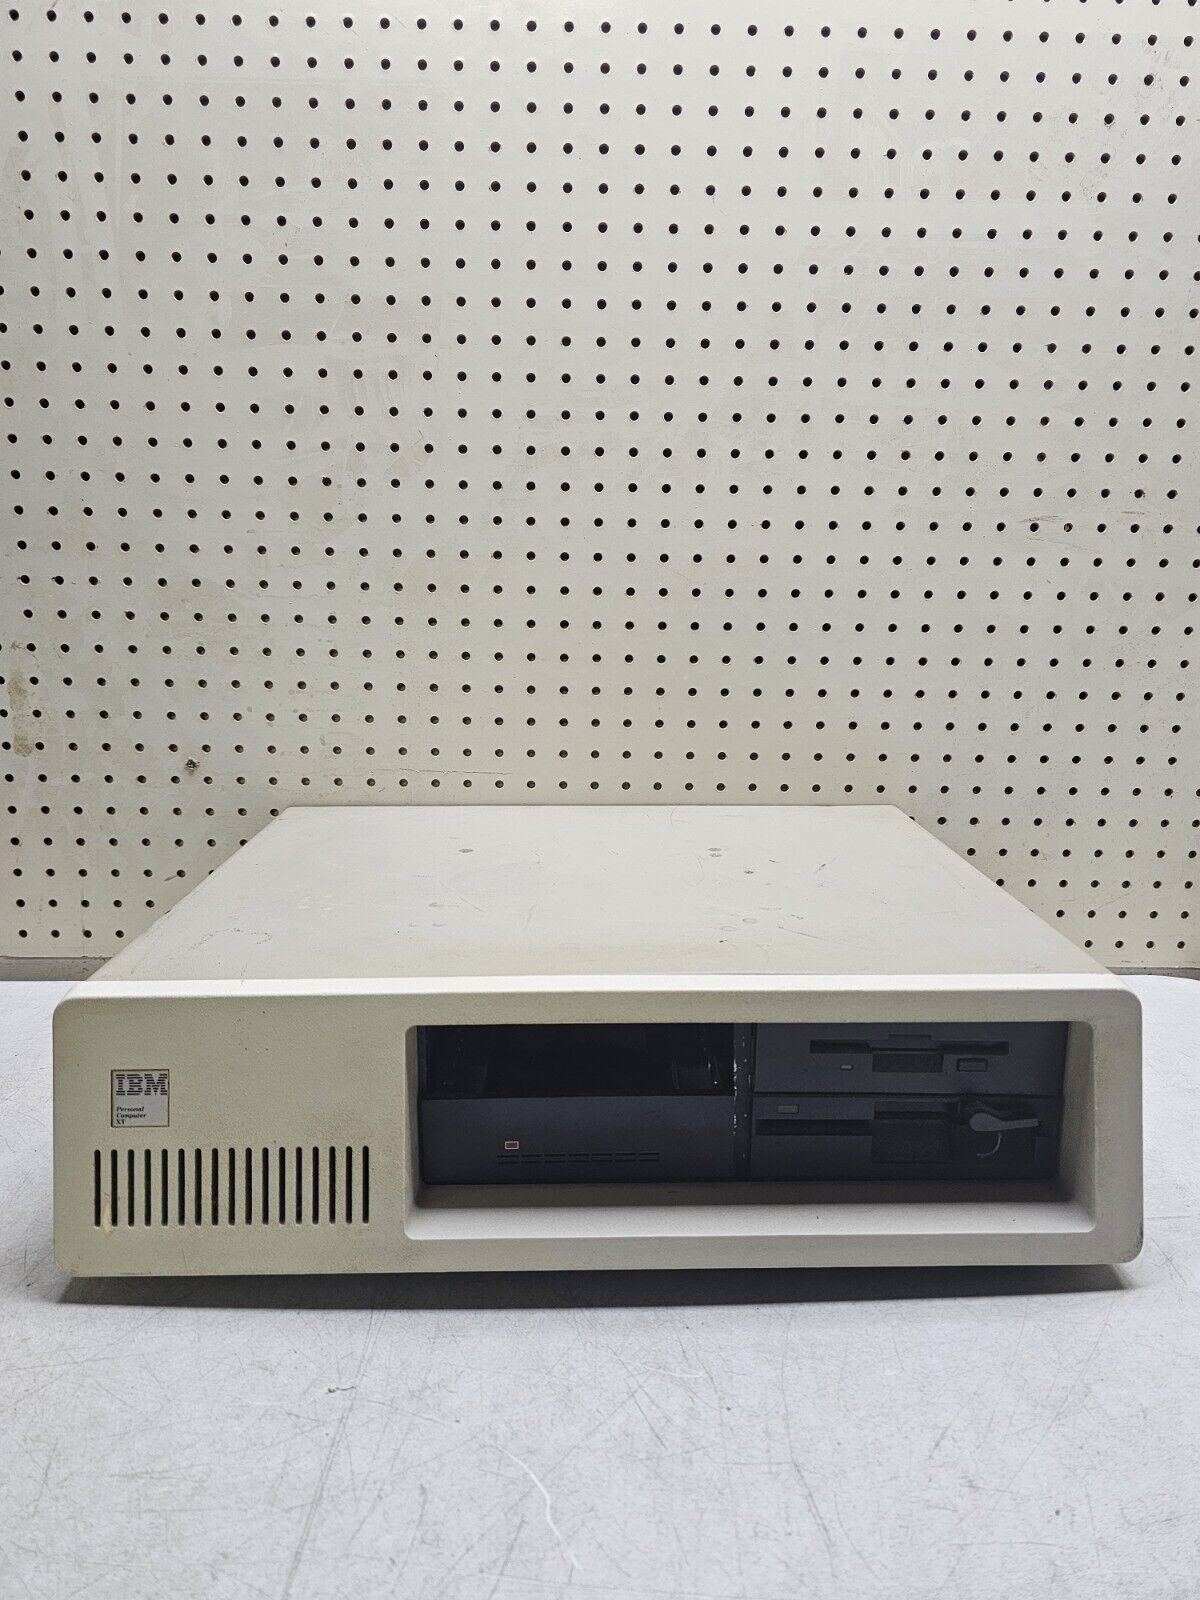 Vintage IBM Personal Computer XT NO HDD Mo: 5160 Cords Not Included No Power